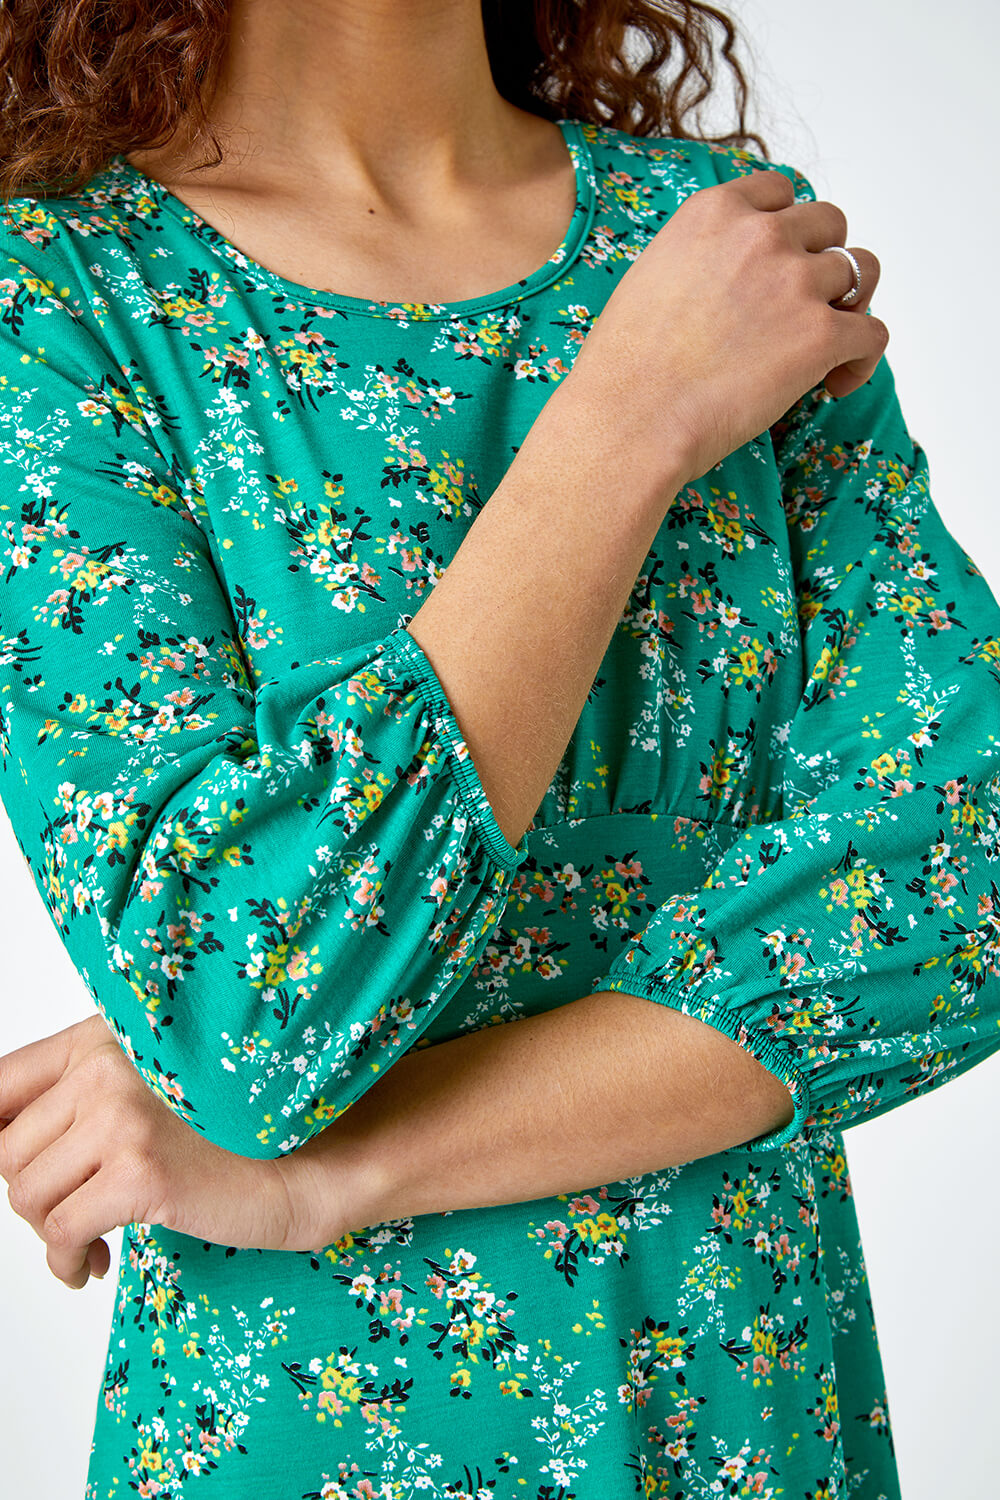 Green Ditsy Floral Print Stretch Jersey Dress, Image 5 of 5